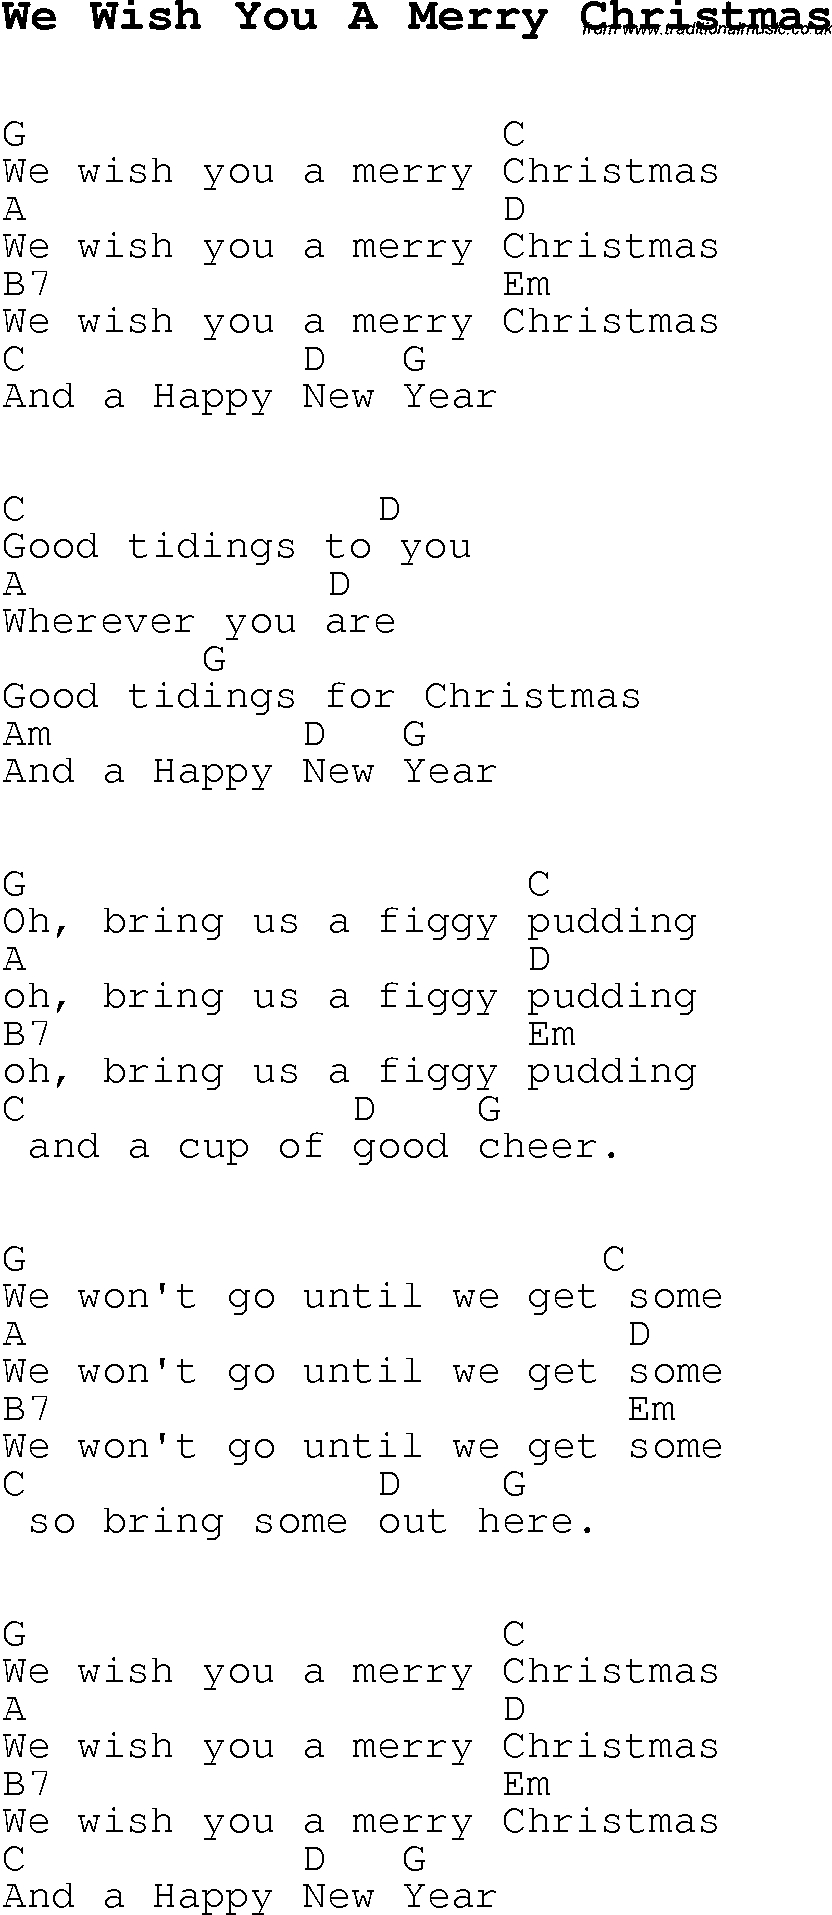 Lord I Need You Chords Christmas Carolsong Lyrics With Chords For We Wish You A Merry